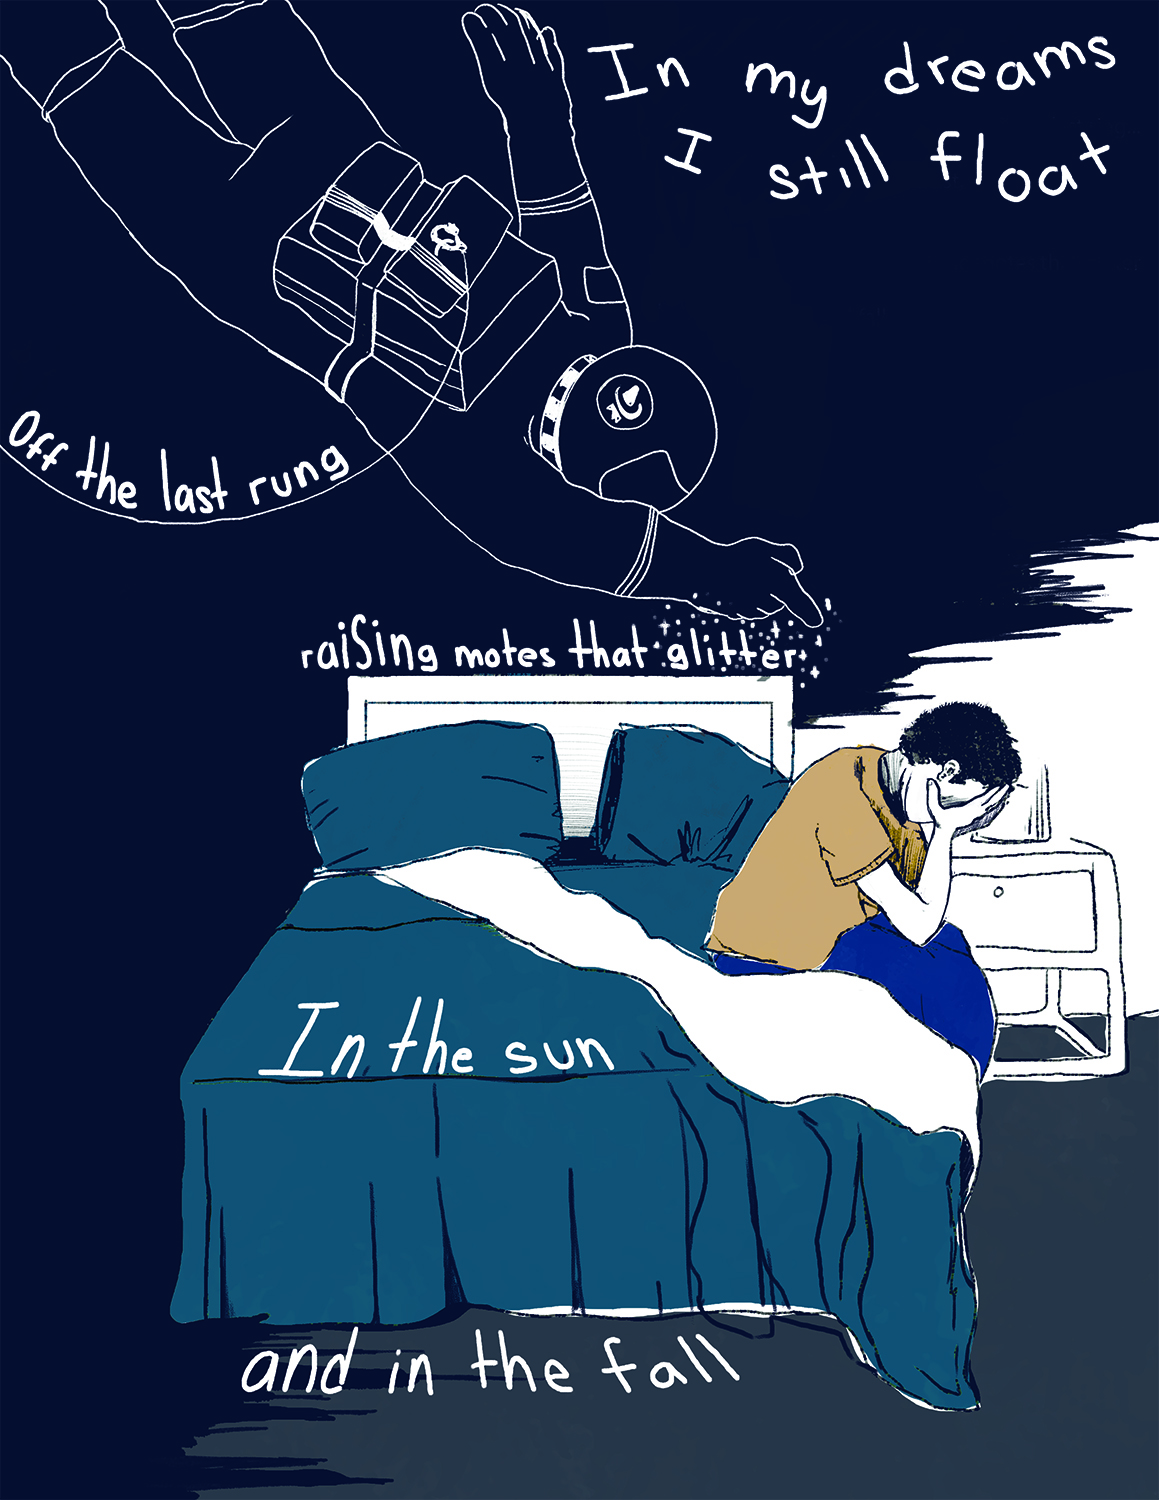 A man sitting on the side of his bed places his face in his hands in sorrow. The outline of an astronaut above him points.